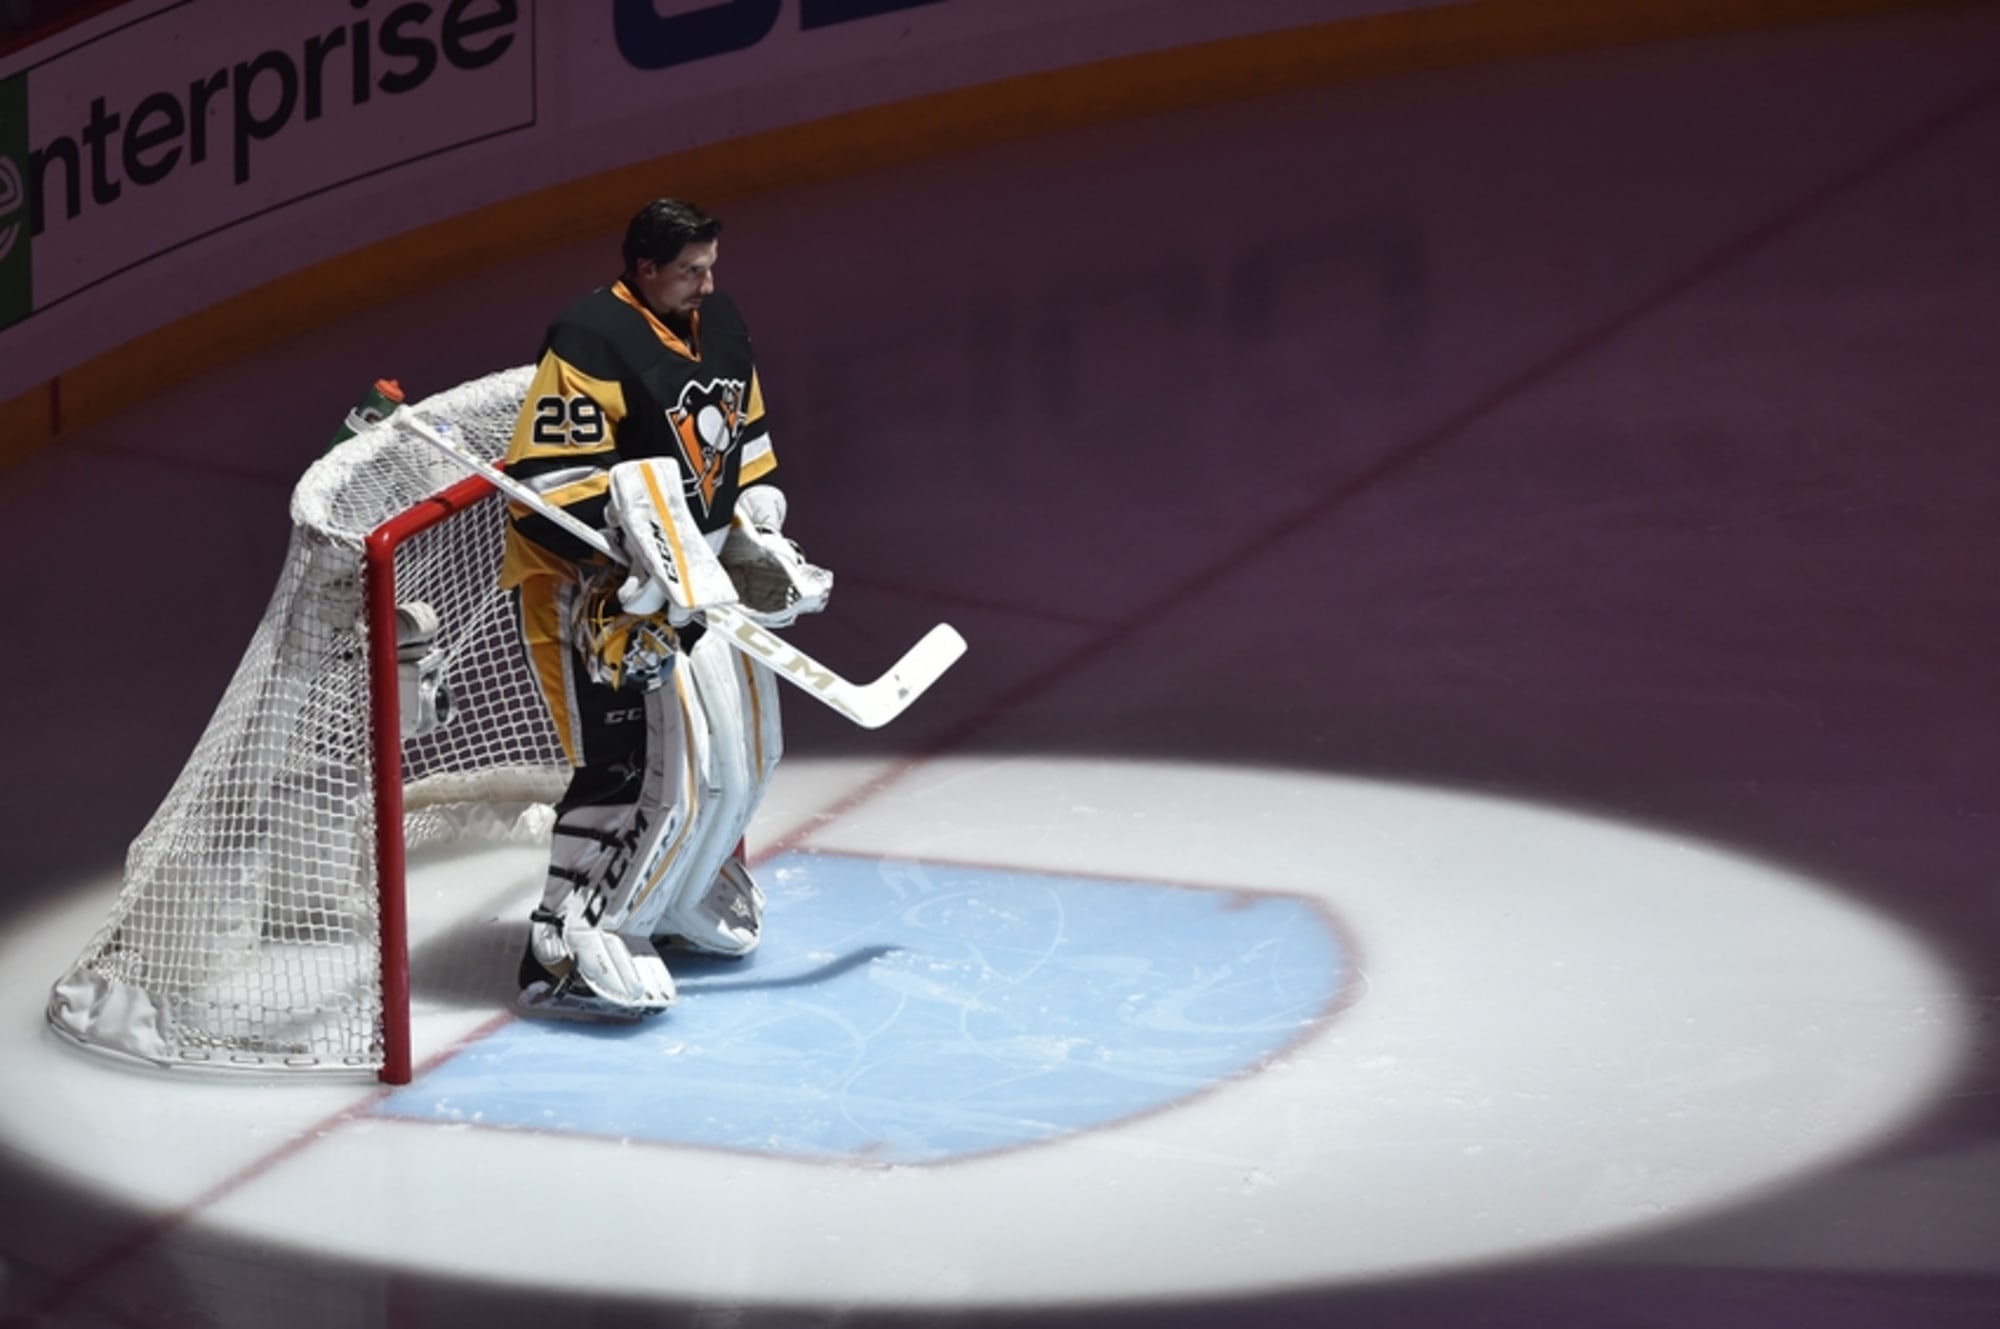 Pittsburgh Penguins goalie Marc-Andre Fleury blocks a shoot with his pads  during a five on three power play in the third period of the Pens 4 - 0  shut out win against